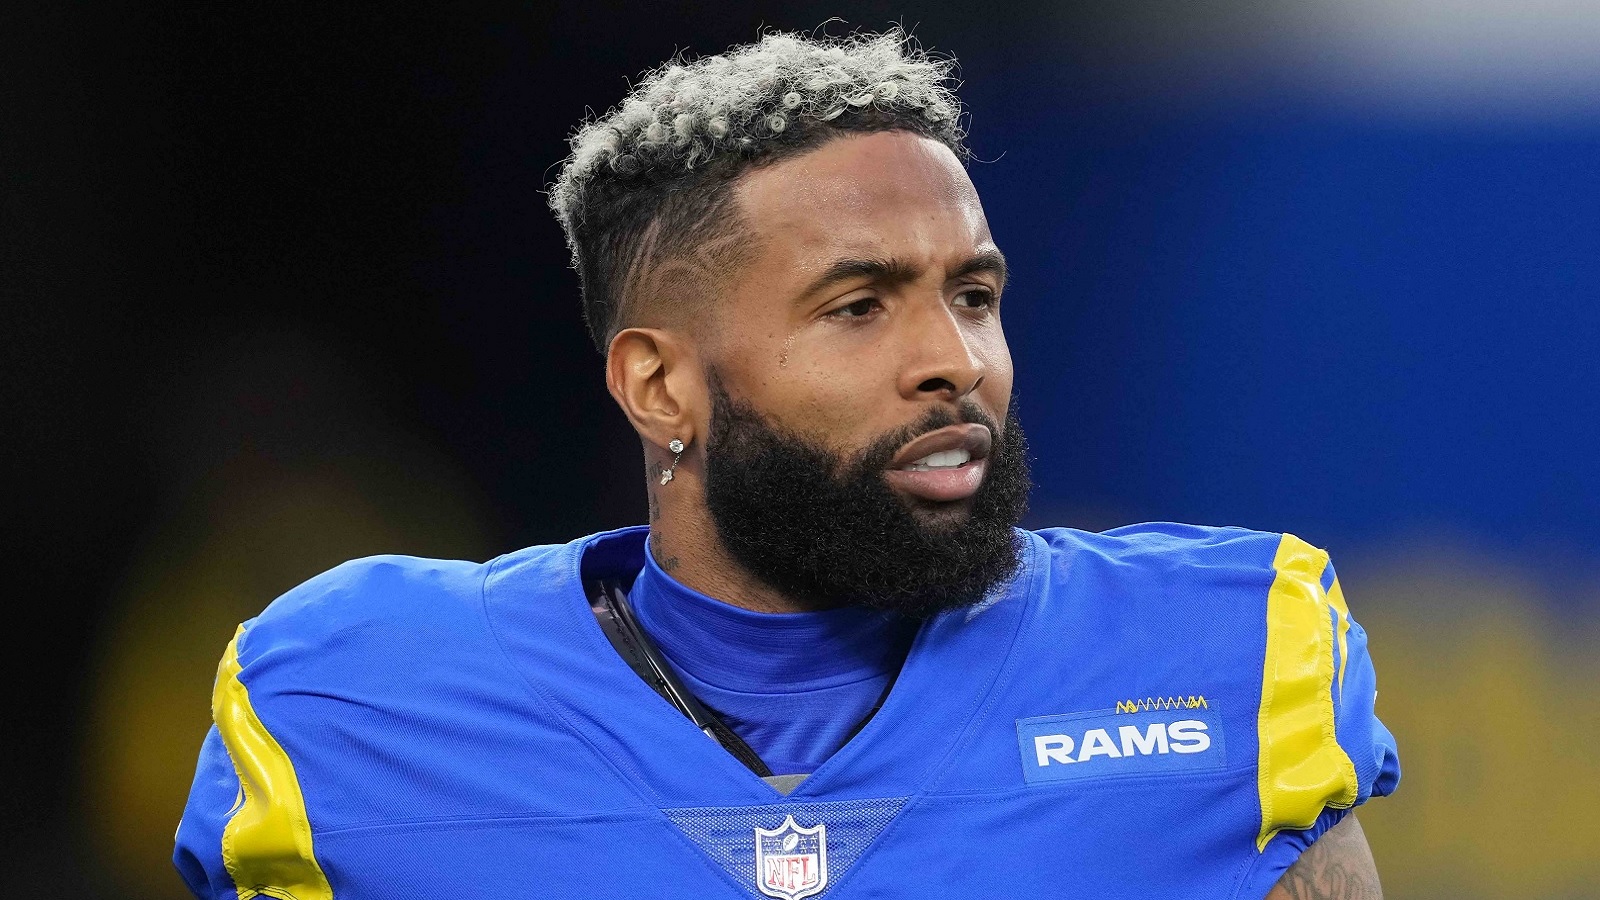 Receiver Odell Beckham Jr. agrees to deal with Rams – The Denver Post